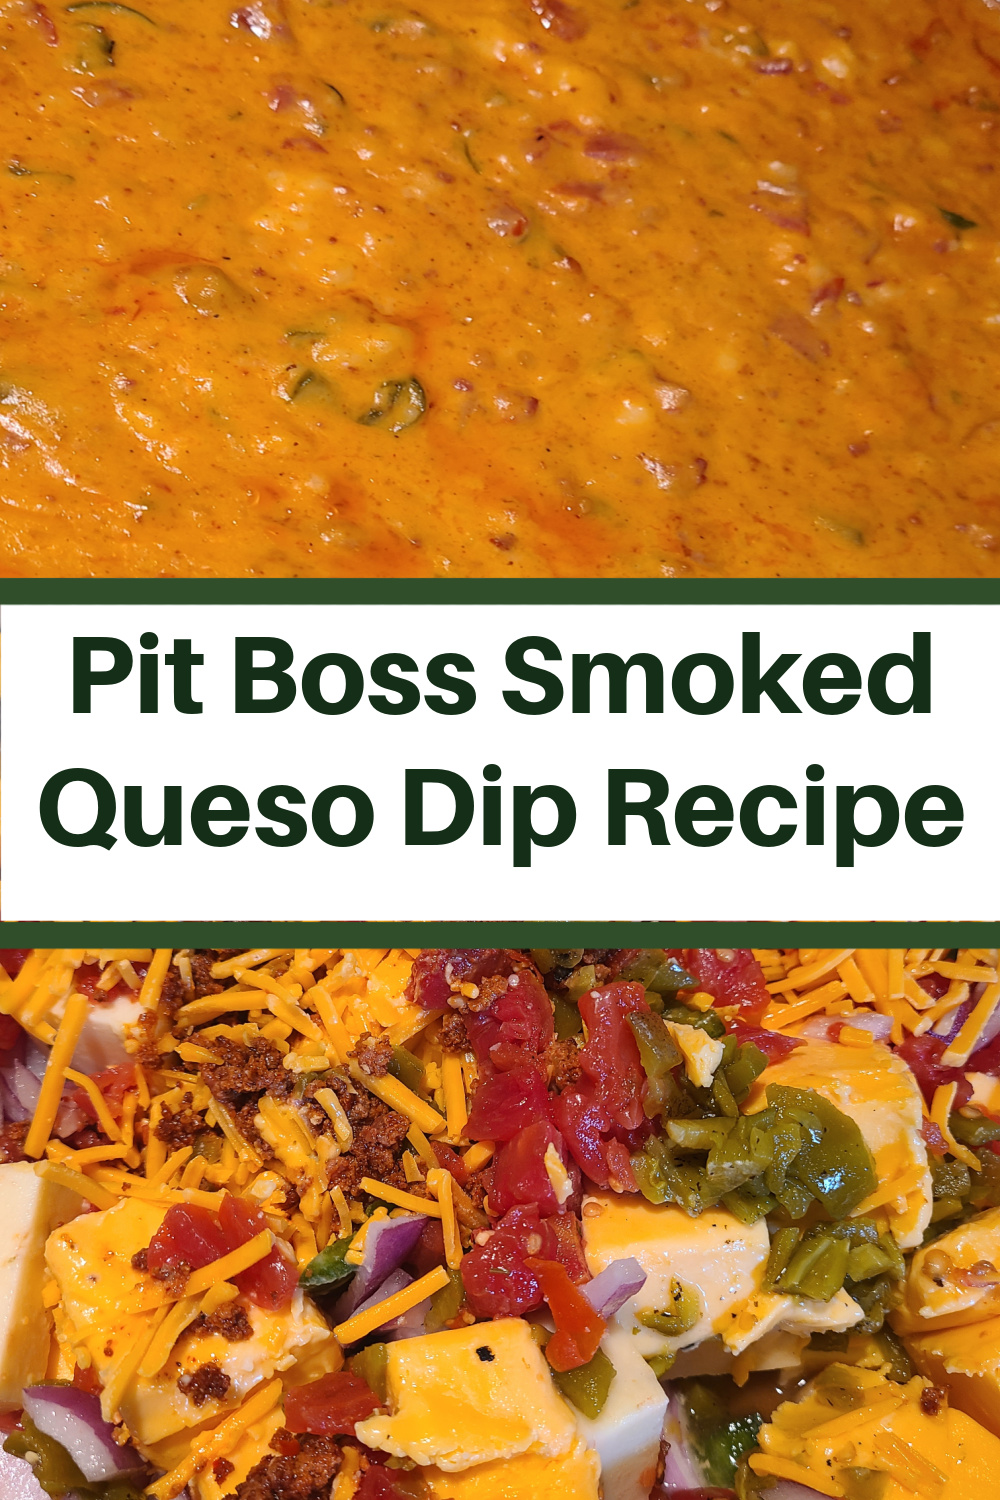 Pit Boss Smoked Queso Dip Recipe